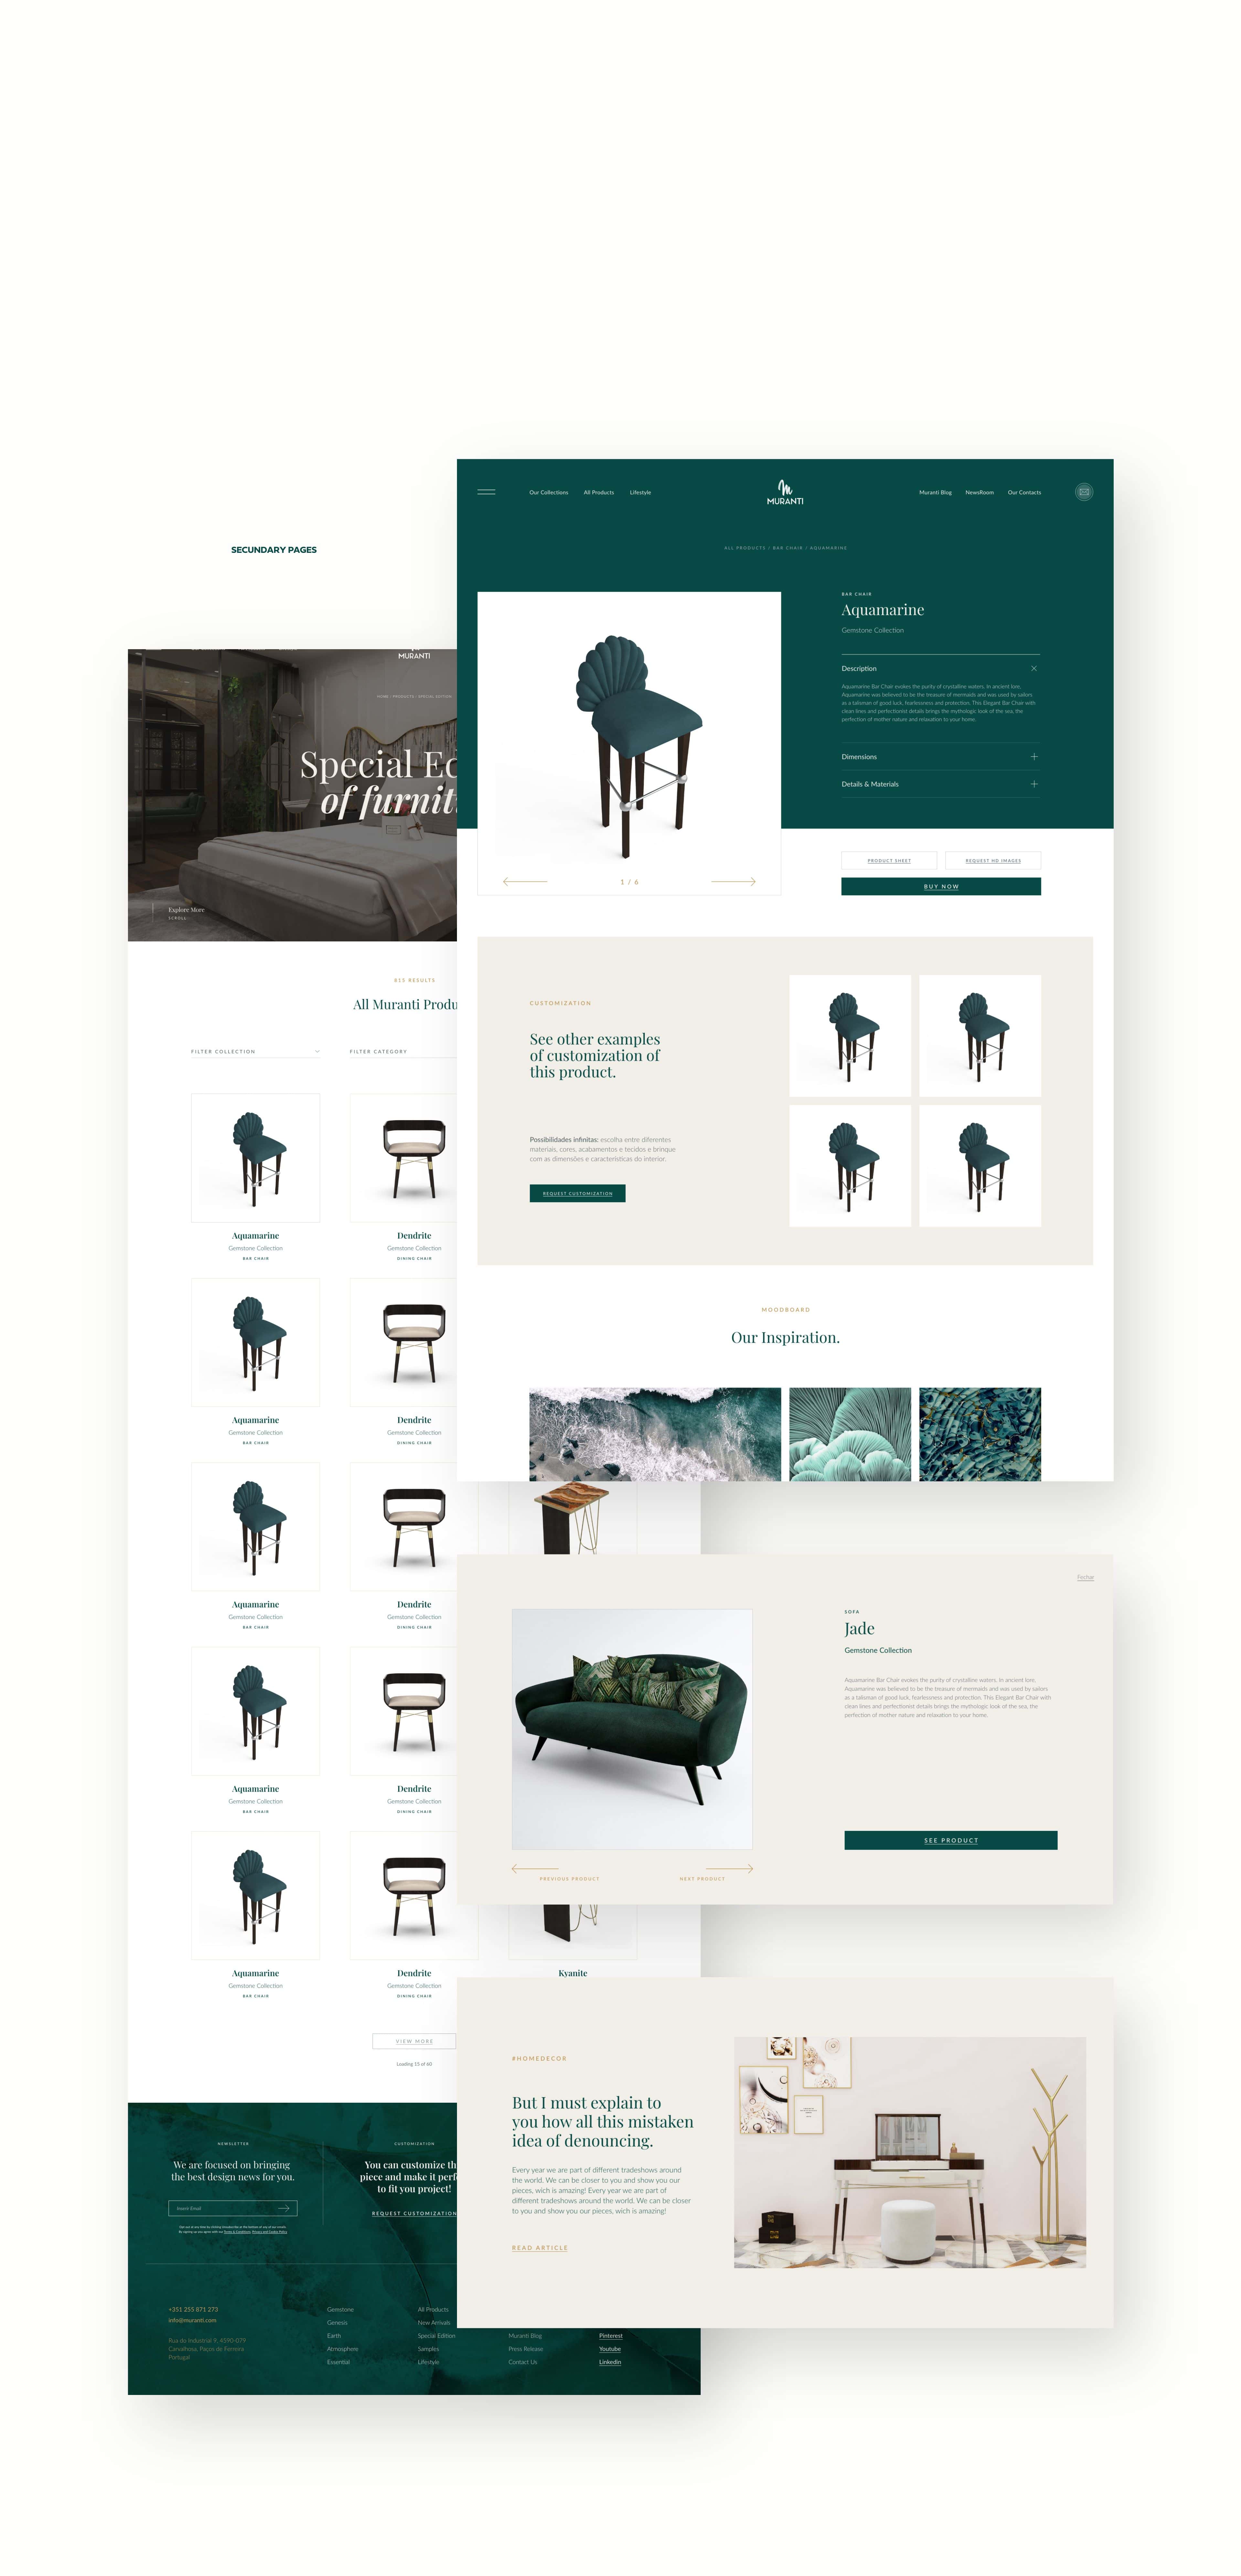 layout developed for website created for furniture brand